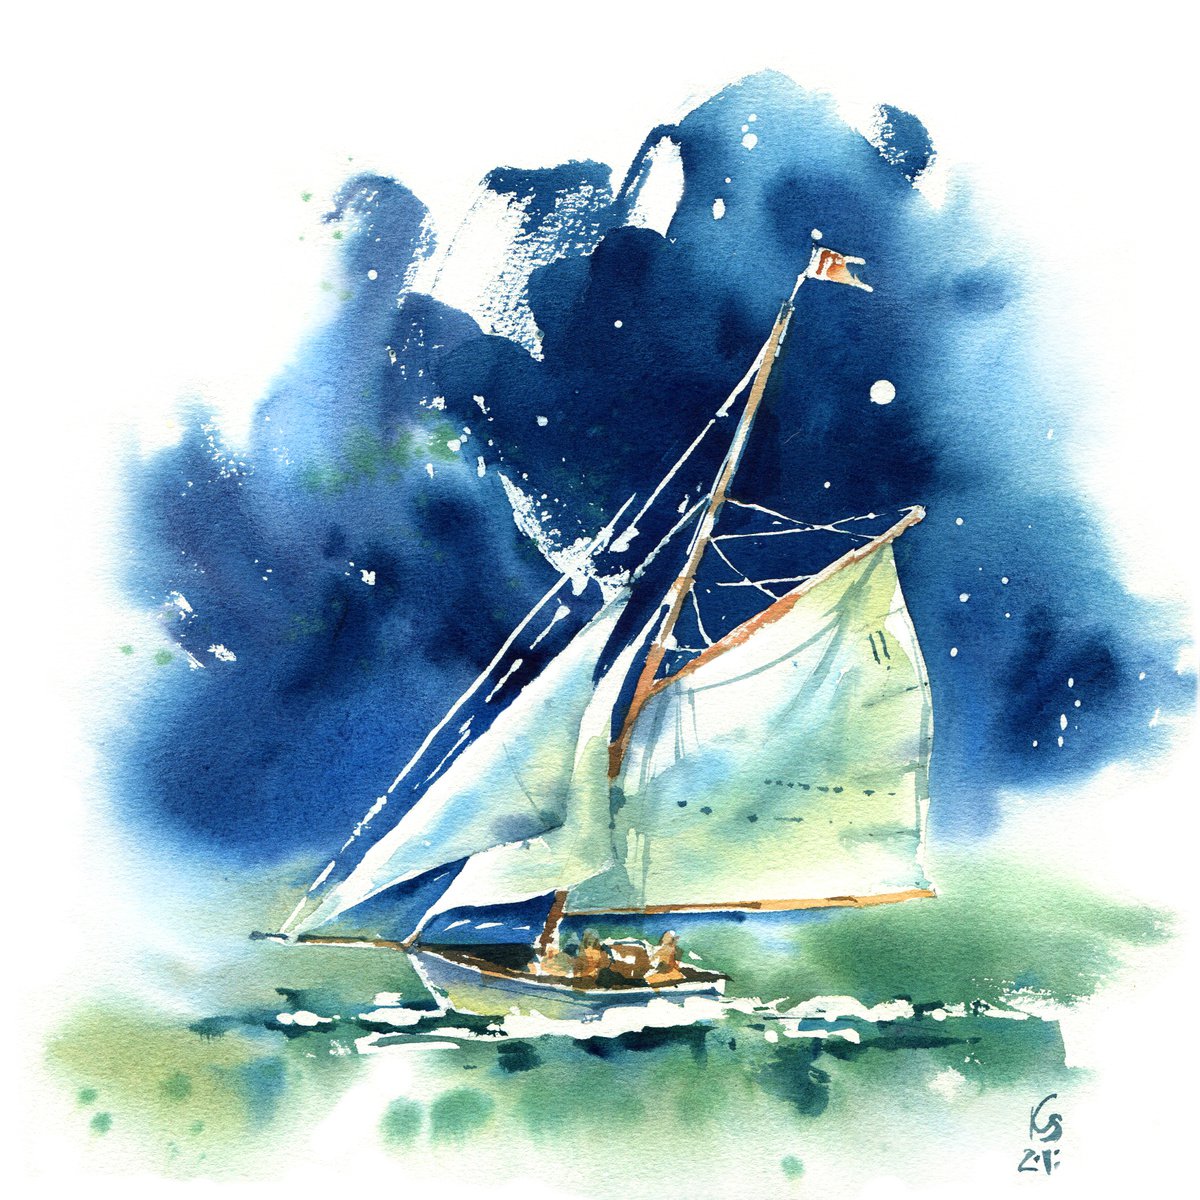 Fair wind to our sails! - Sea romantic watercolor landscape with a sailboat against the... by Ksenia Selianko